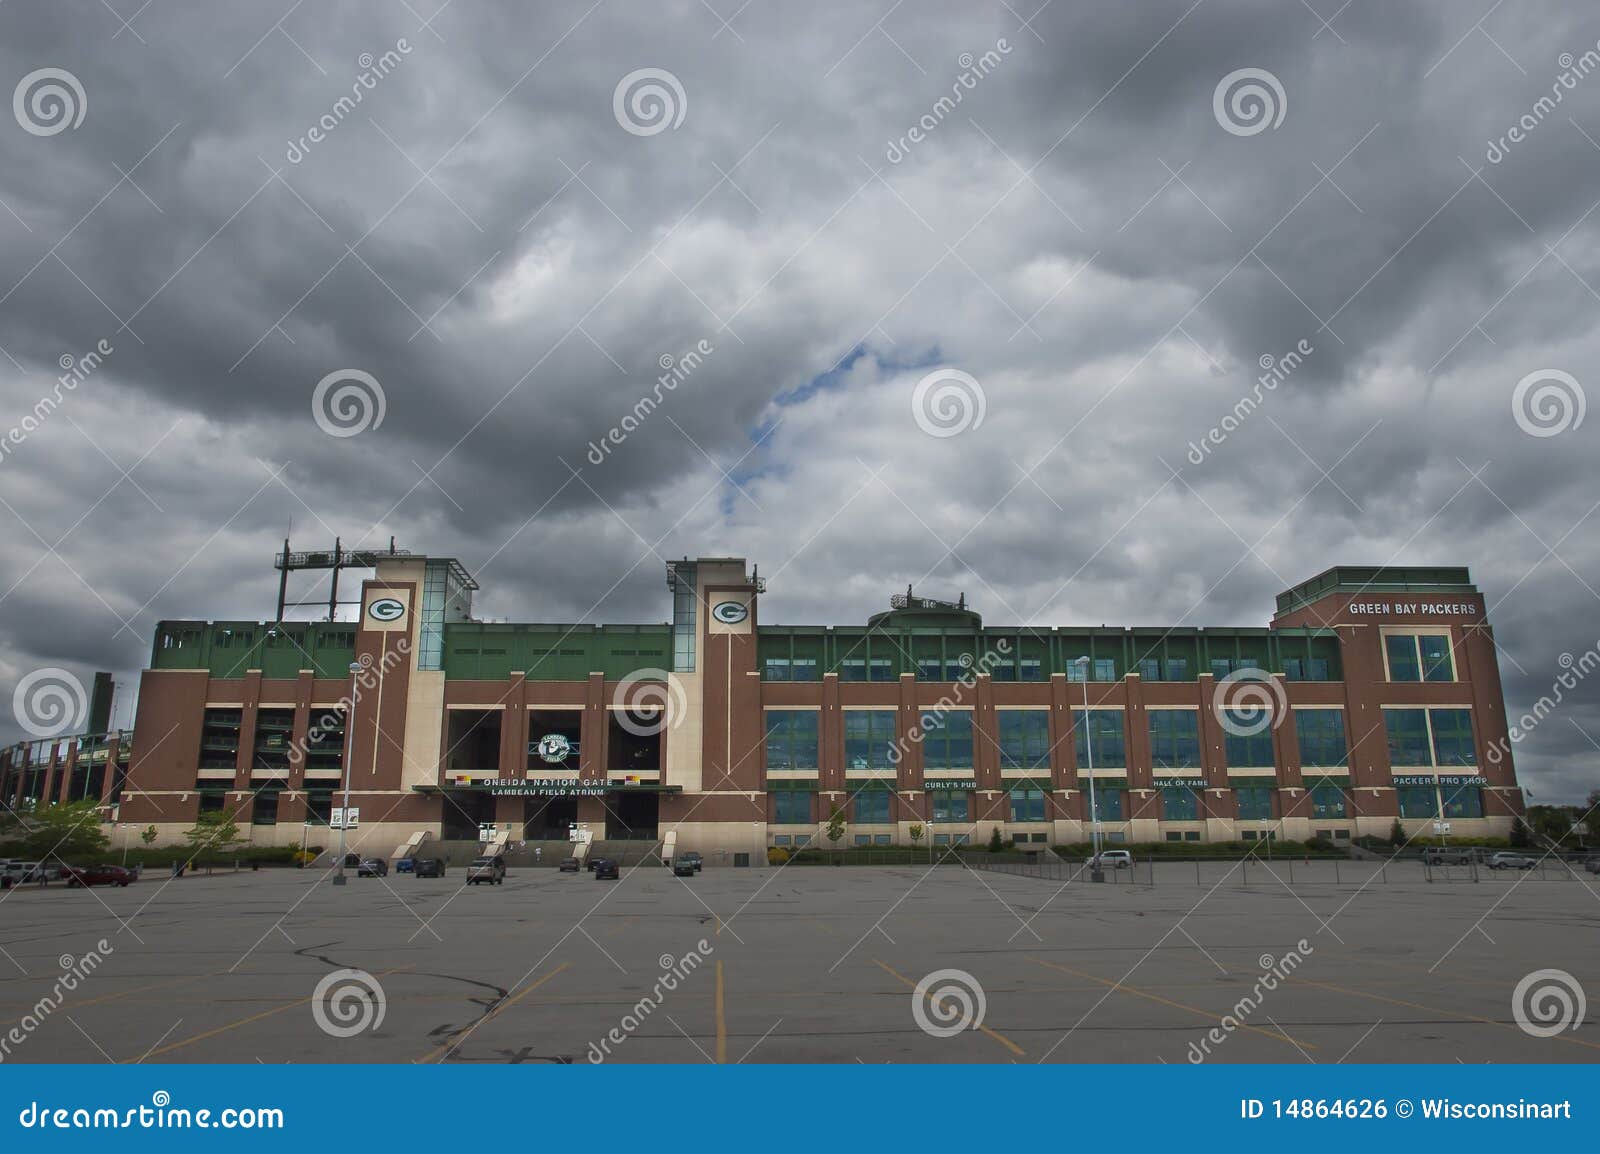 70 Lambeau Field Stock Photos Pictures  RoyaltyFree Images  iStock